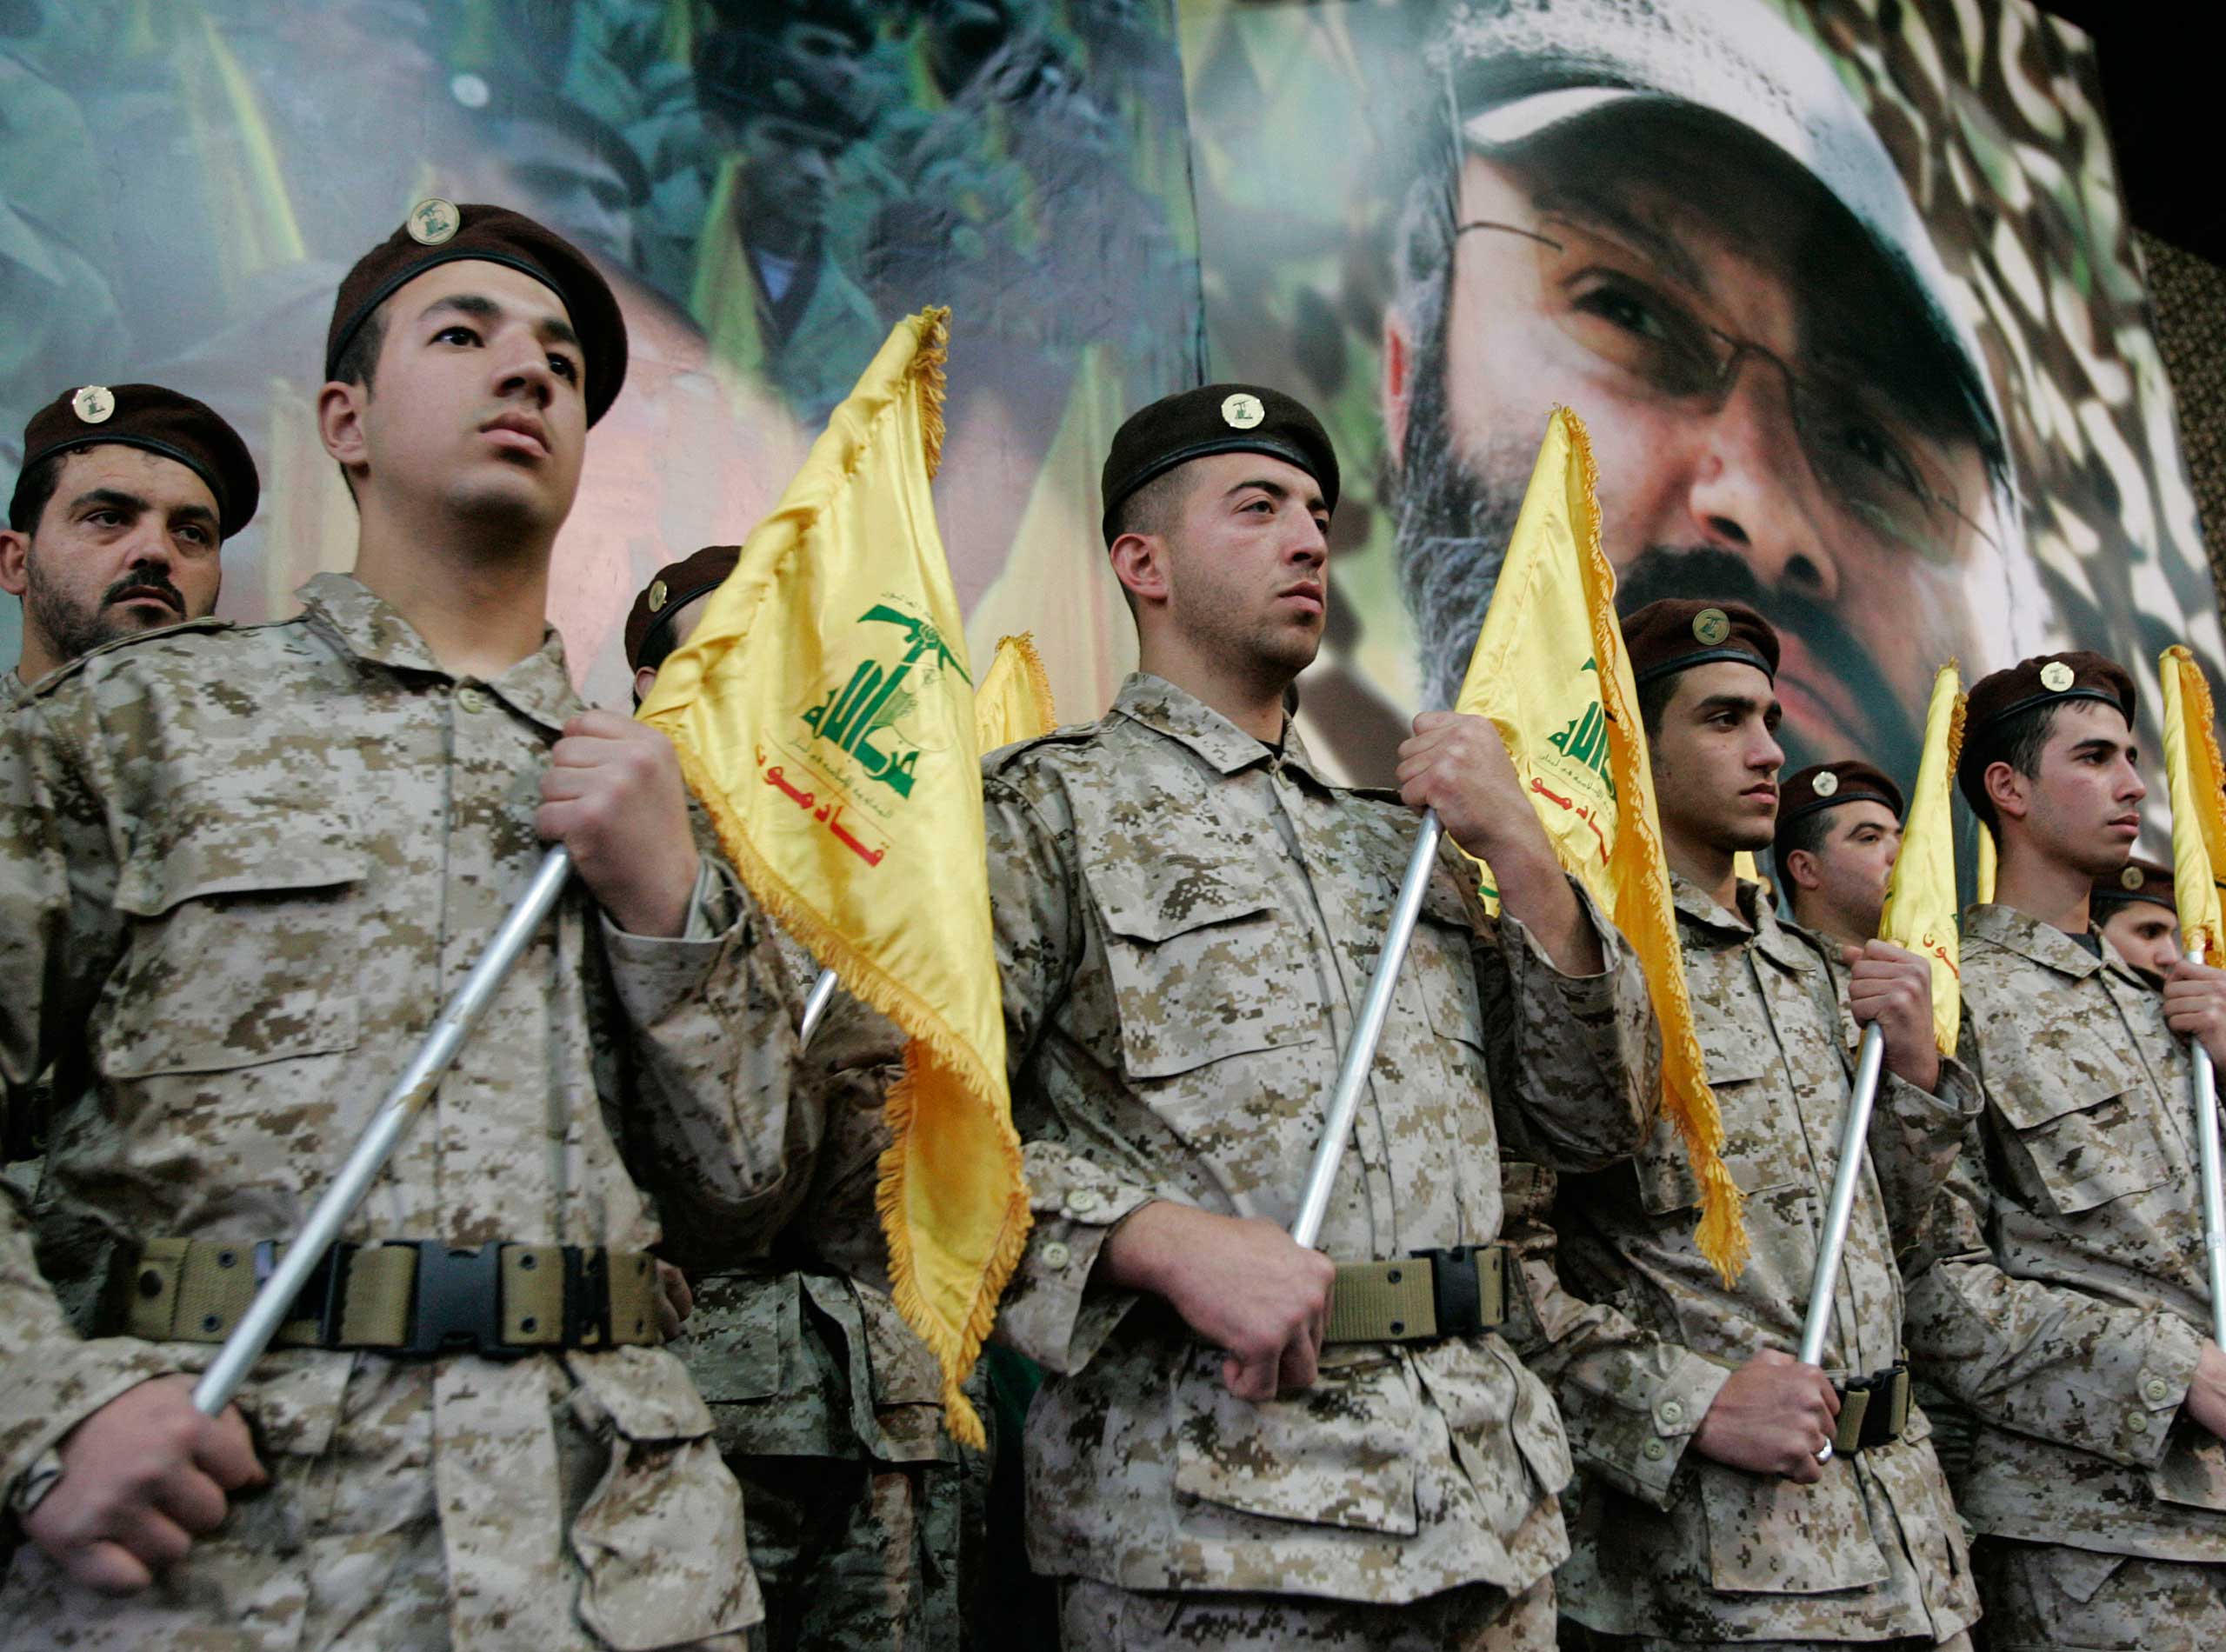 Hezbollah fighters hold their party flags and  stand next to a portrait which shows their slain top commander Imad Mughniyeh, as they attend a rally to commemorate Mughniyeh and two other leaders, Abbas Musawi and Ragheb Harb, in the Shiite suburb of Beirut, Feb. 22, 2008. (Hussein Malla—AP)